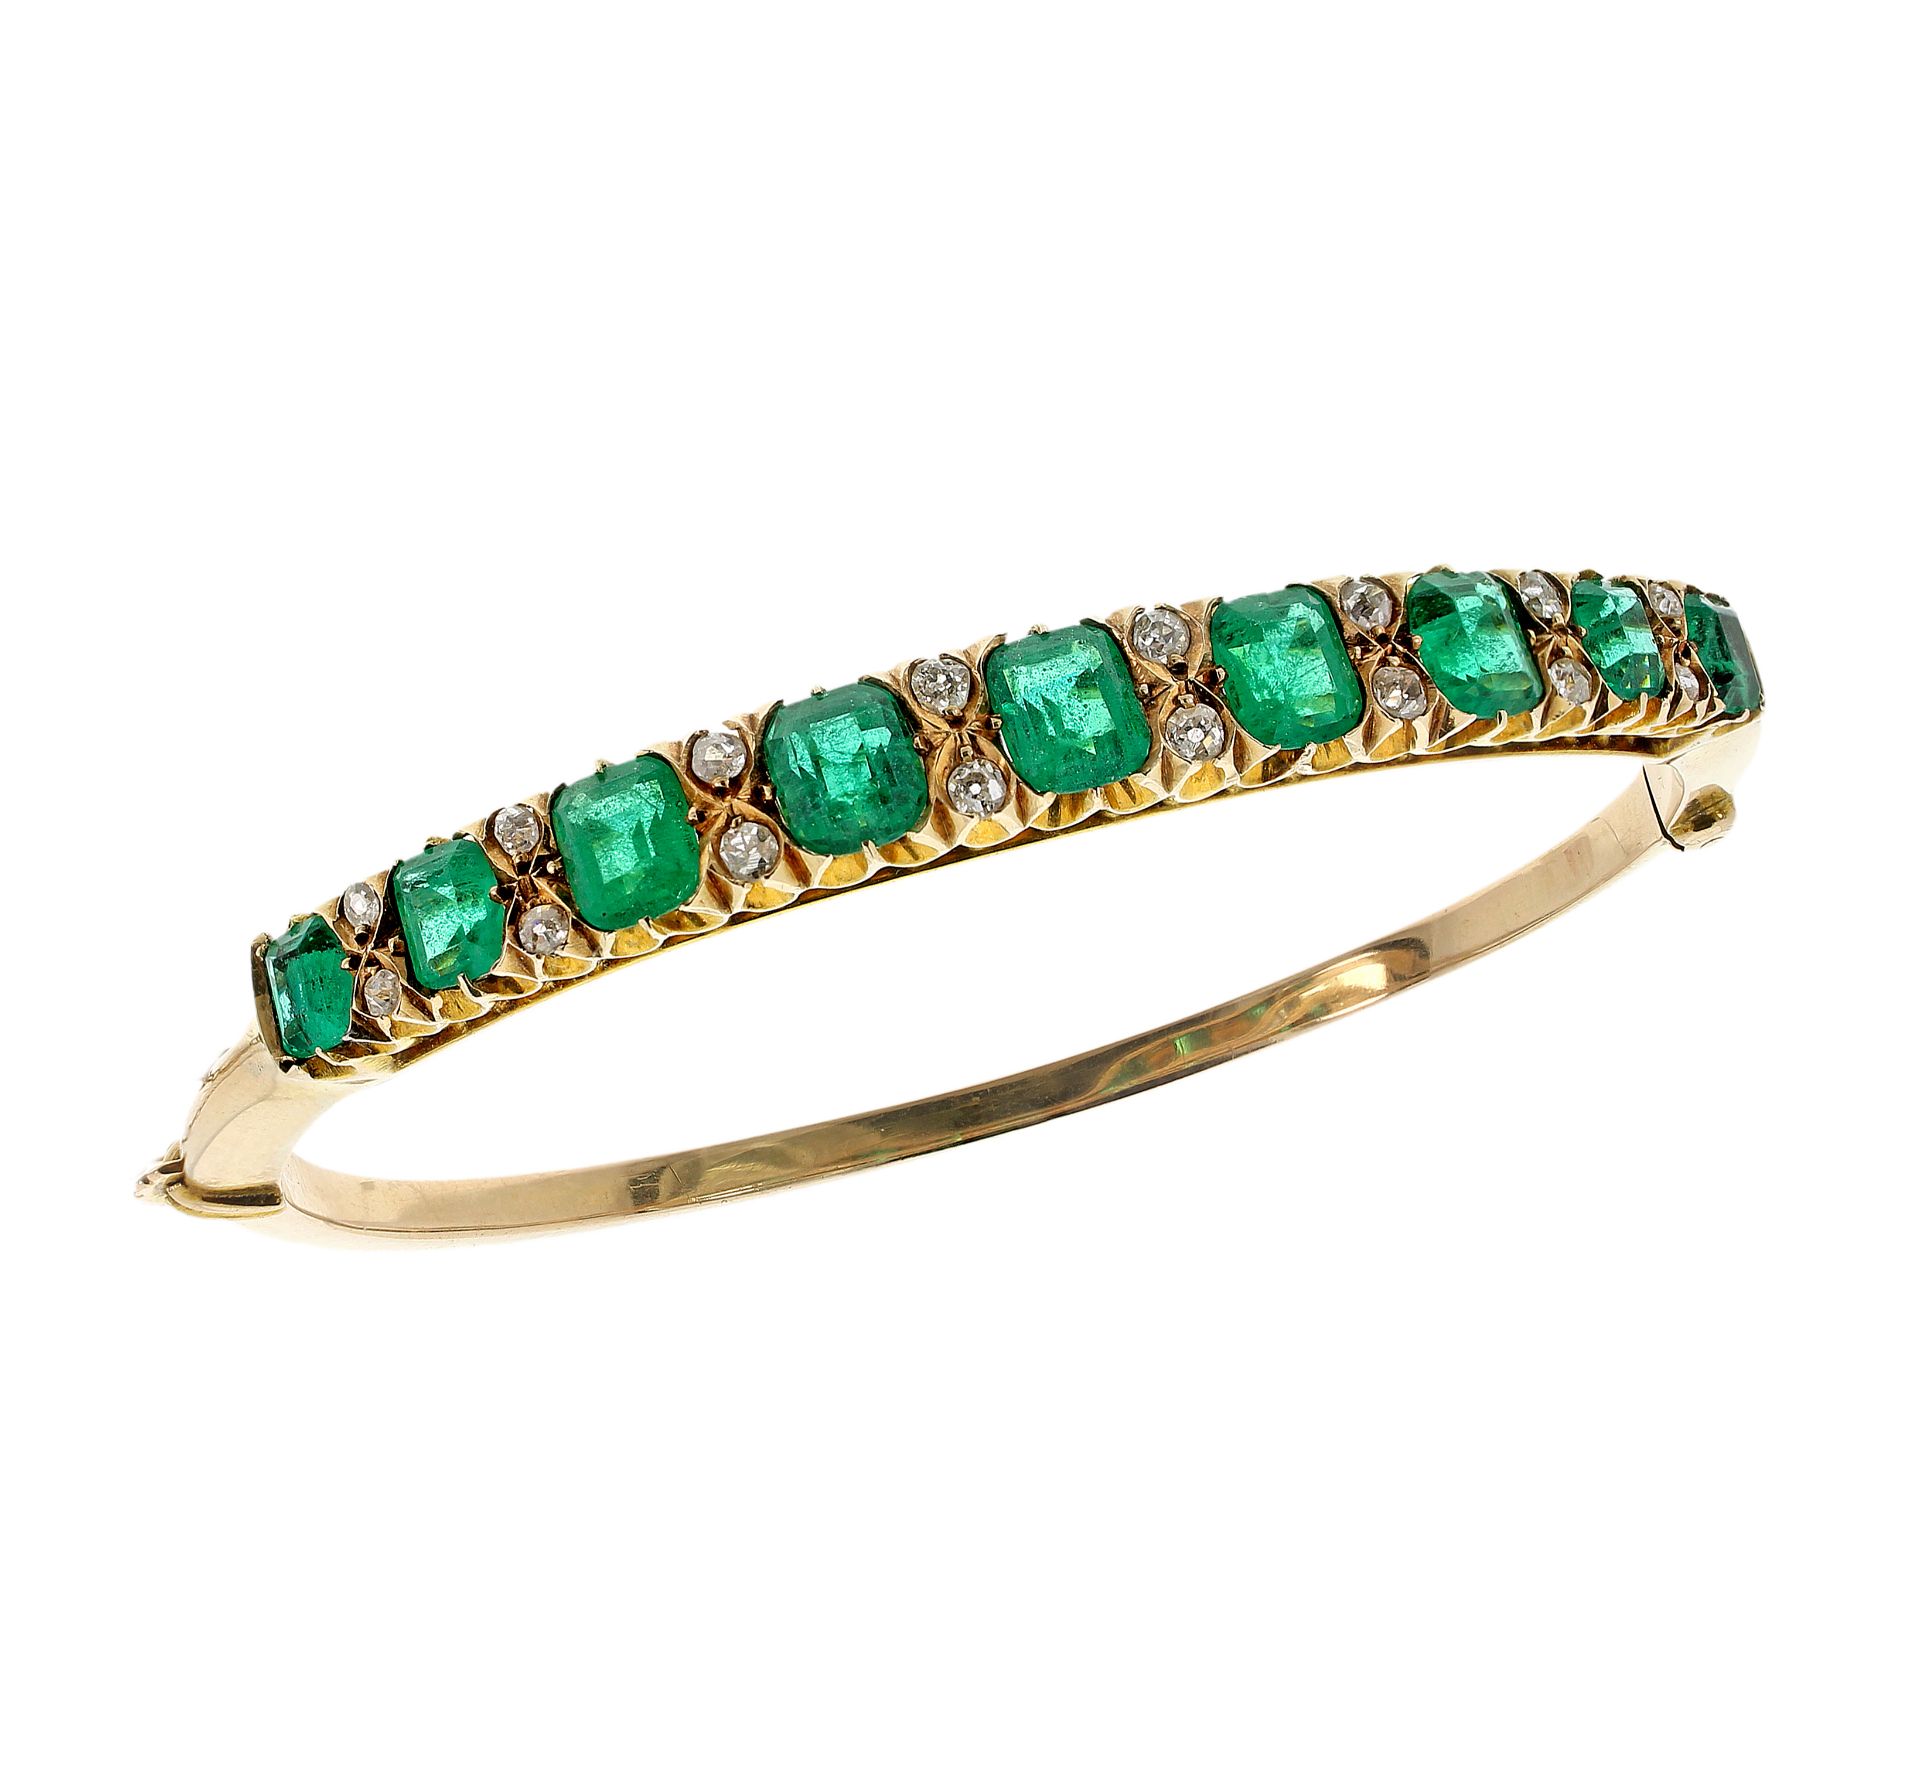 AN EMERALD AND DIAMOND BANGLE in yellow gold, set with a half hoop of graduated emerald cut emeralds